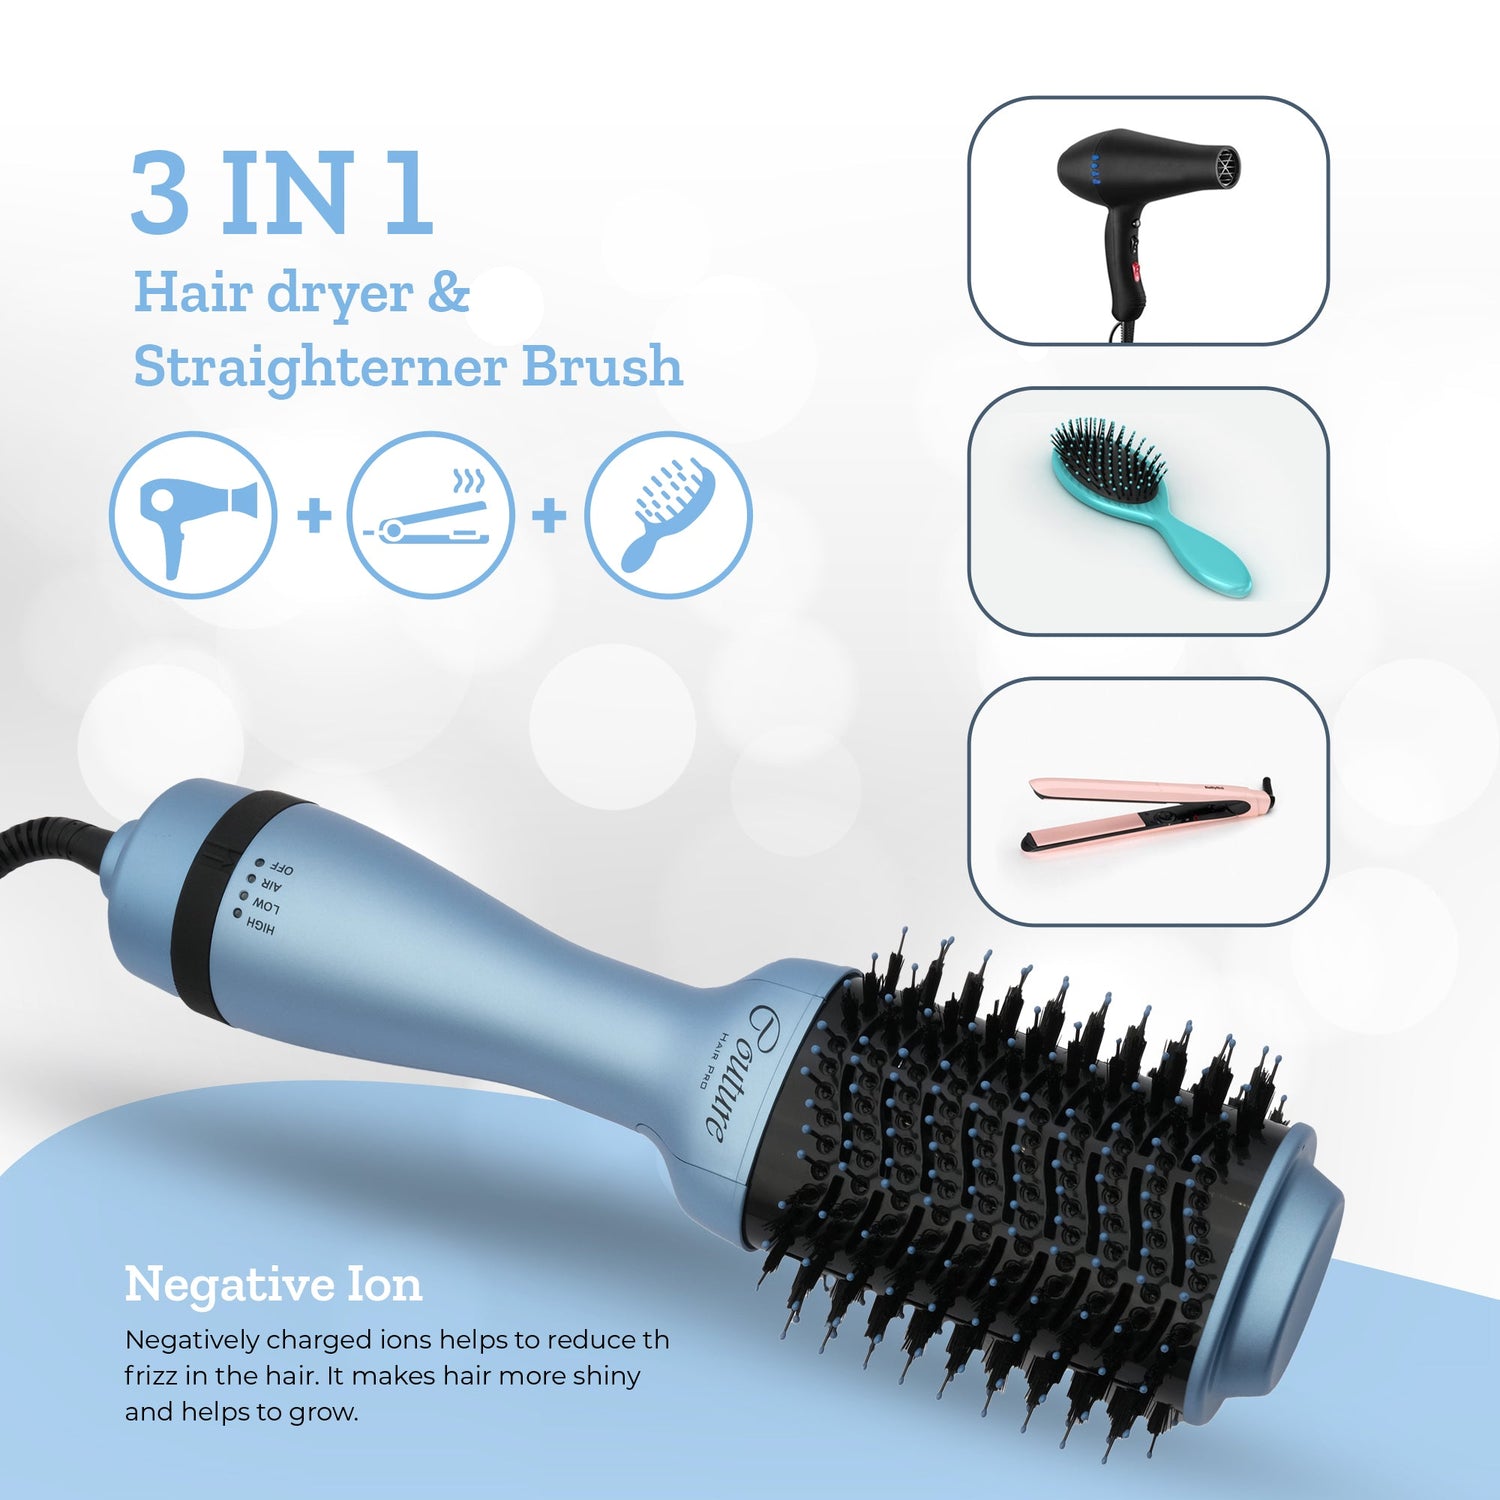 Couture Hair Pro Hot Air Brush - 3 in 1 Hair Straightening Brush, Volumizer & Dryer - Baby Blue - Couture Hair Pro